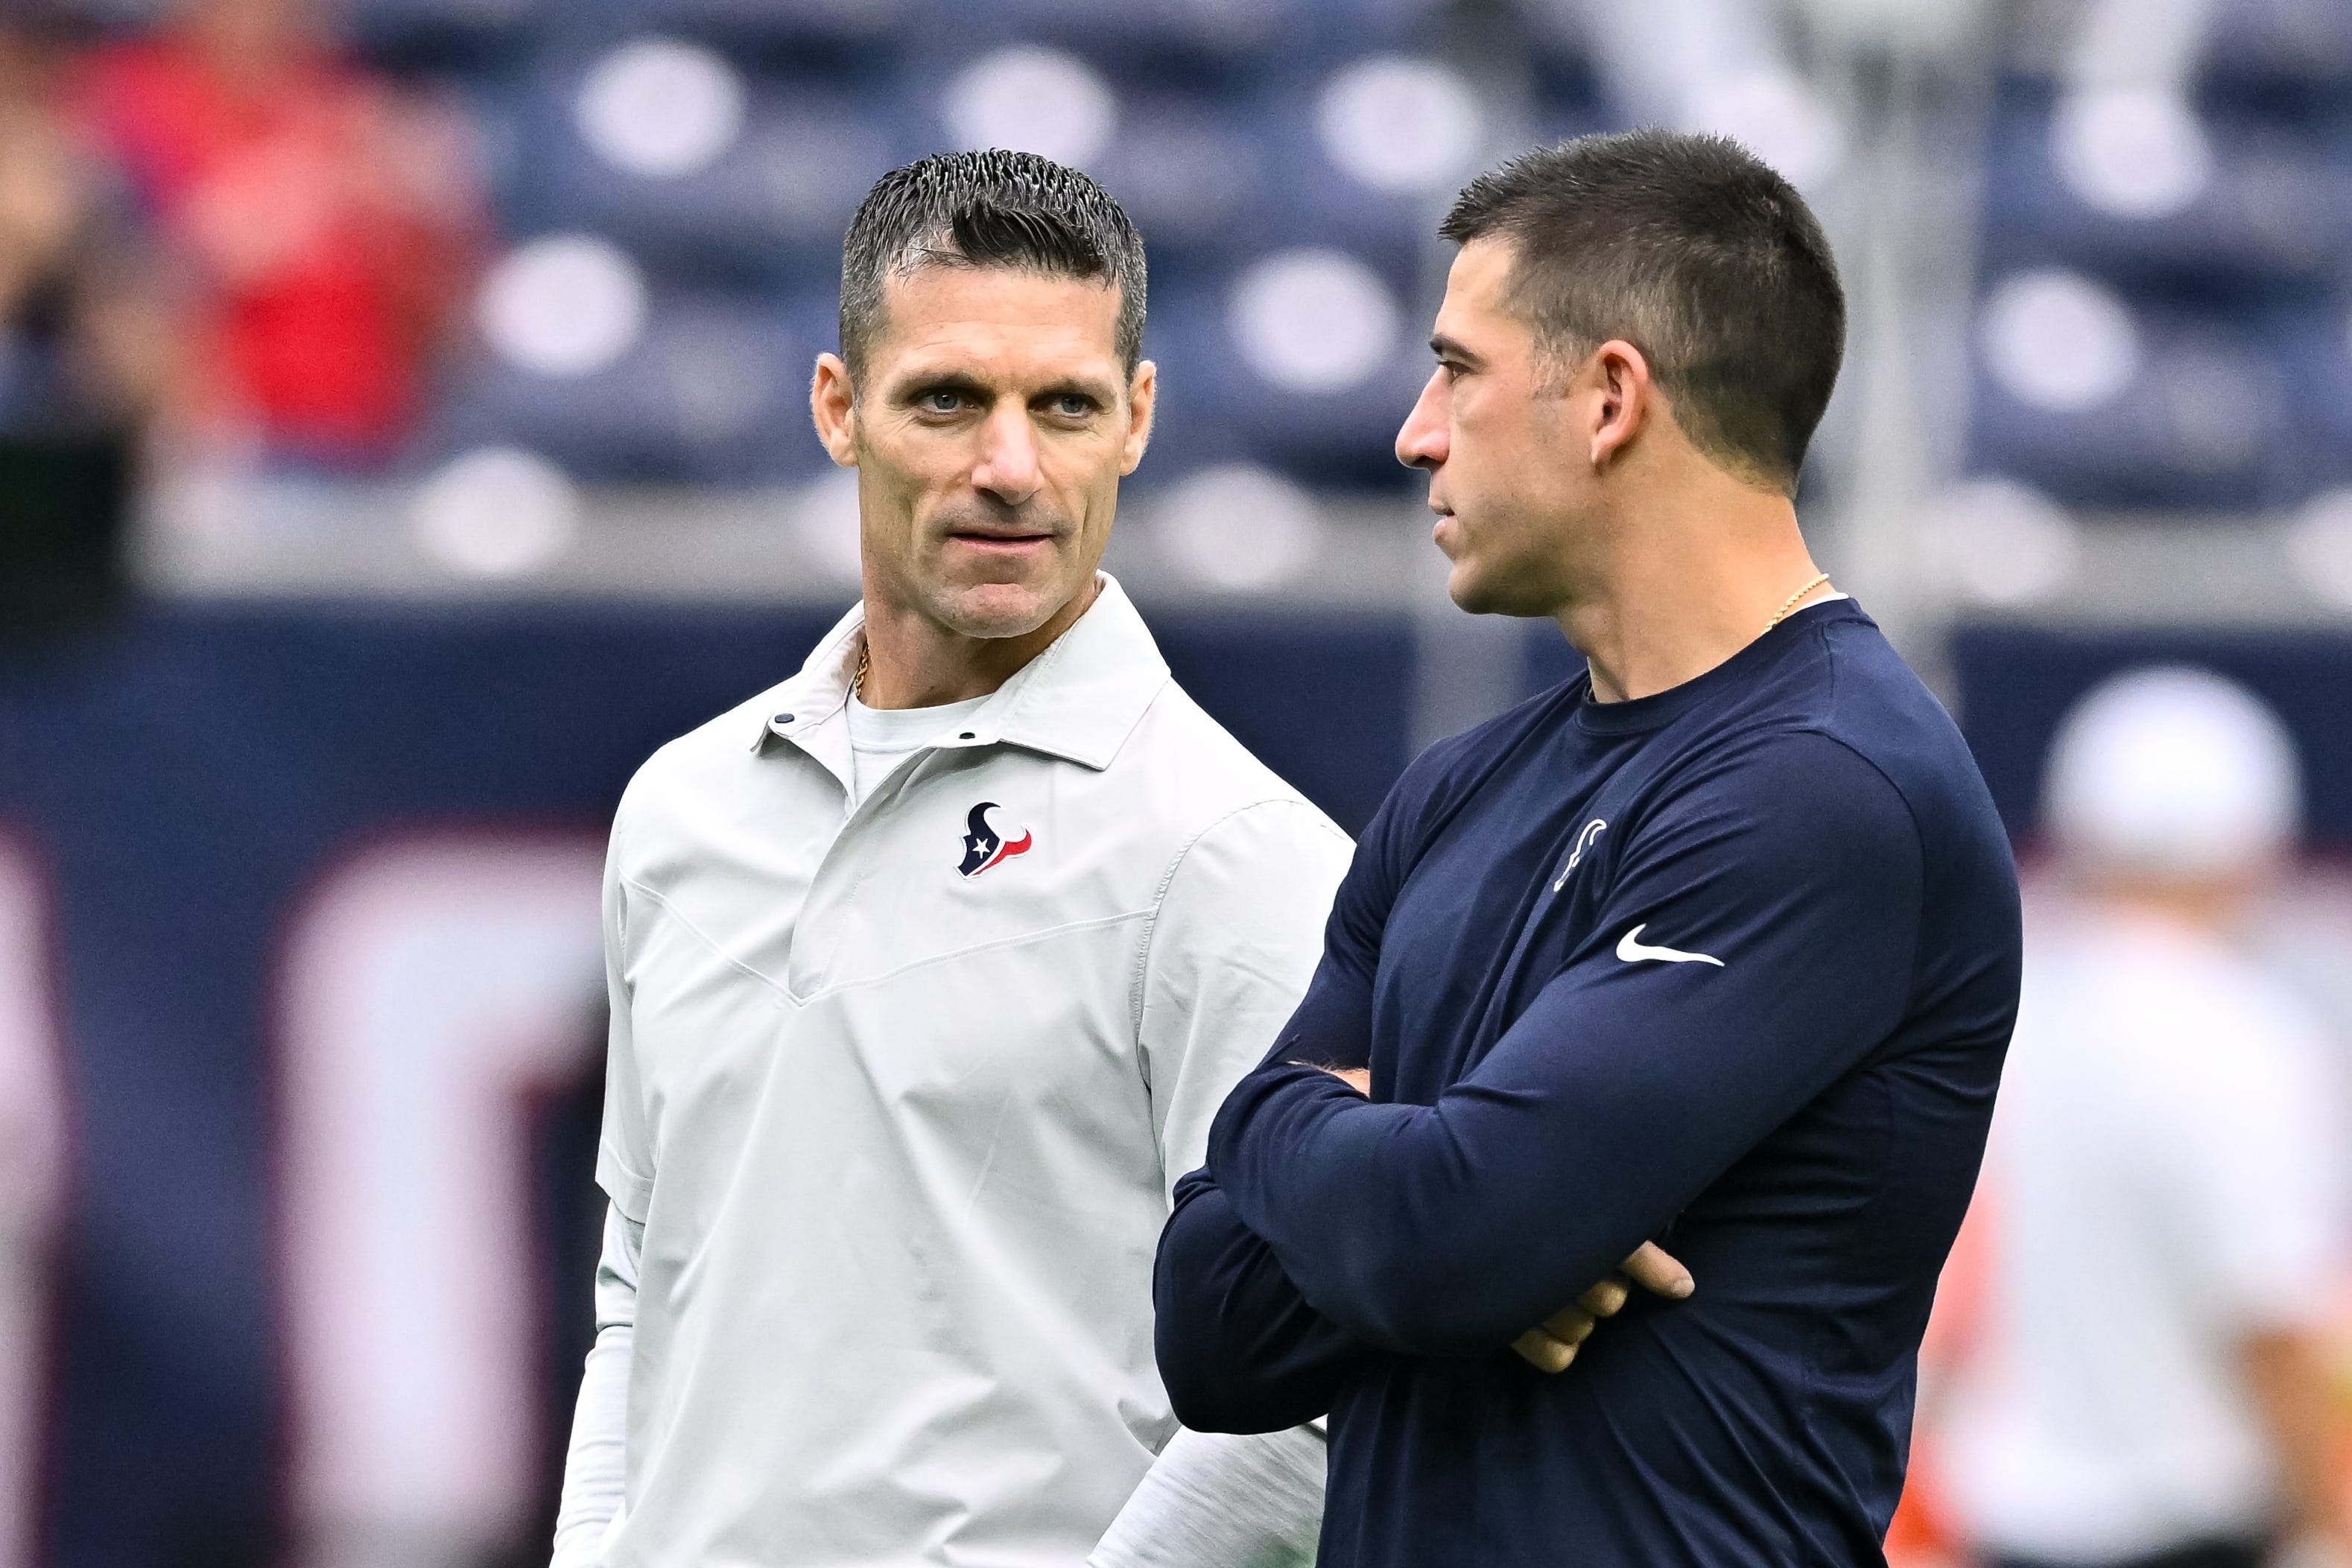 barefield: three years later, nick caserio finally has the texans in business